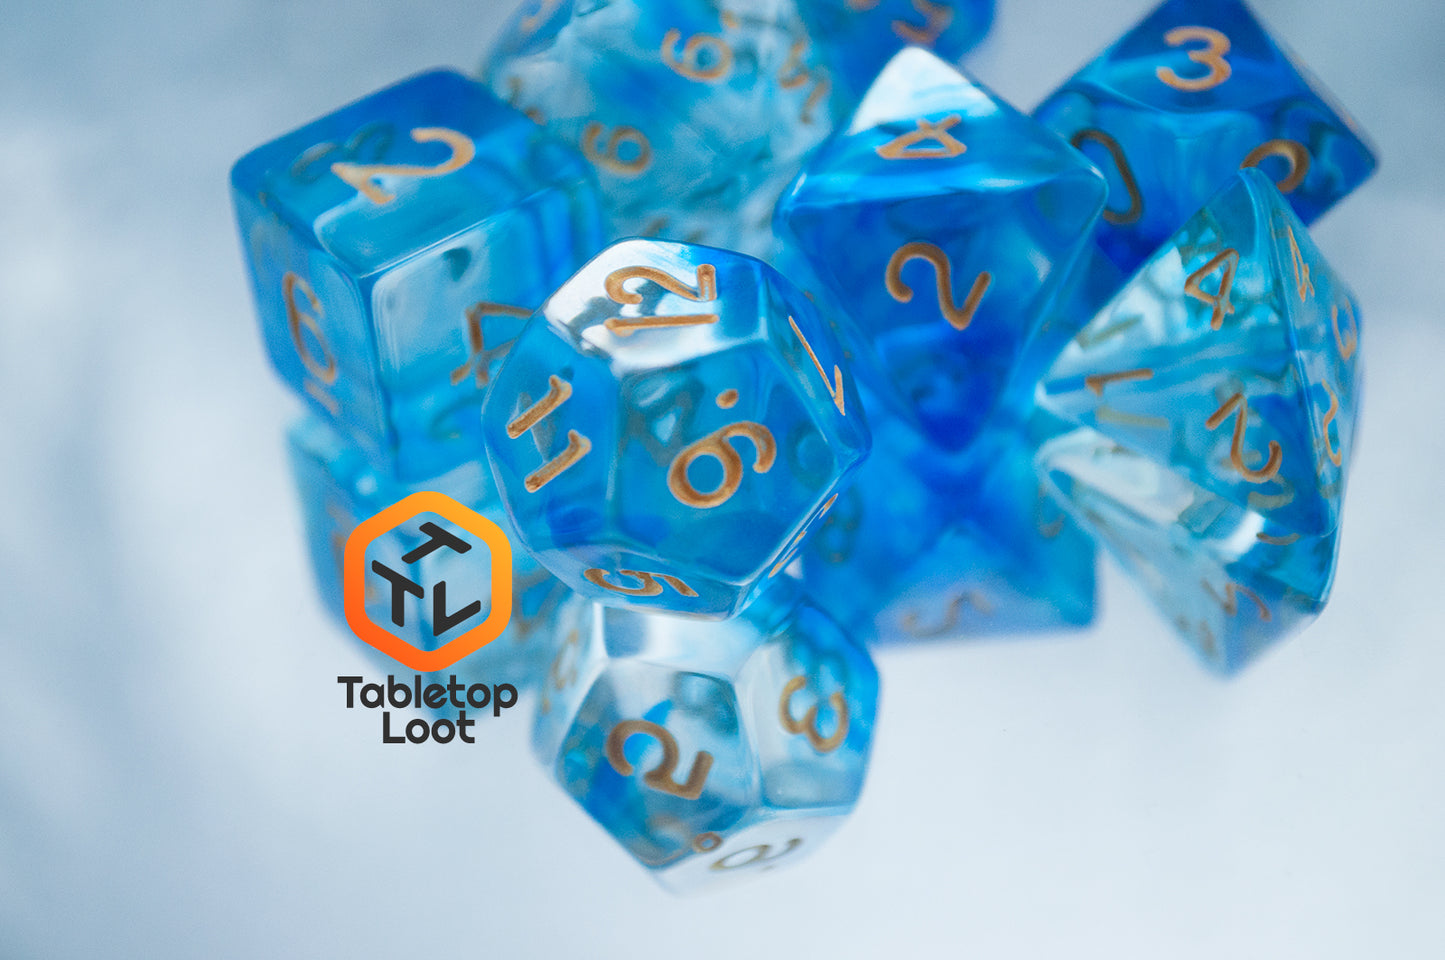 A close up of the Under the Sea 7 piece dice set from Tabletop Loot with swirls of blue and gold numbering.